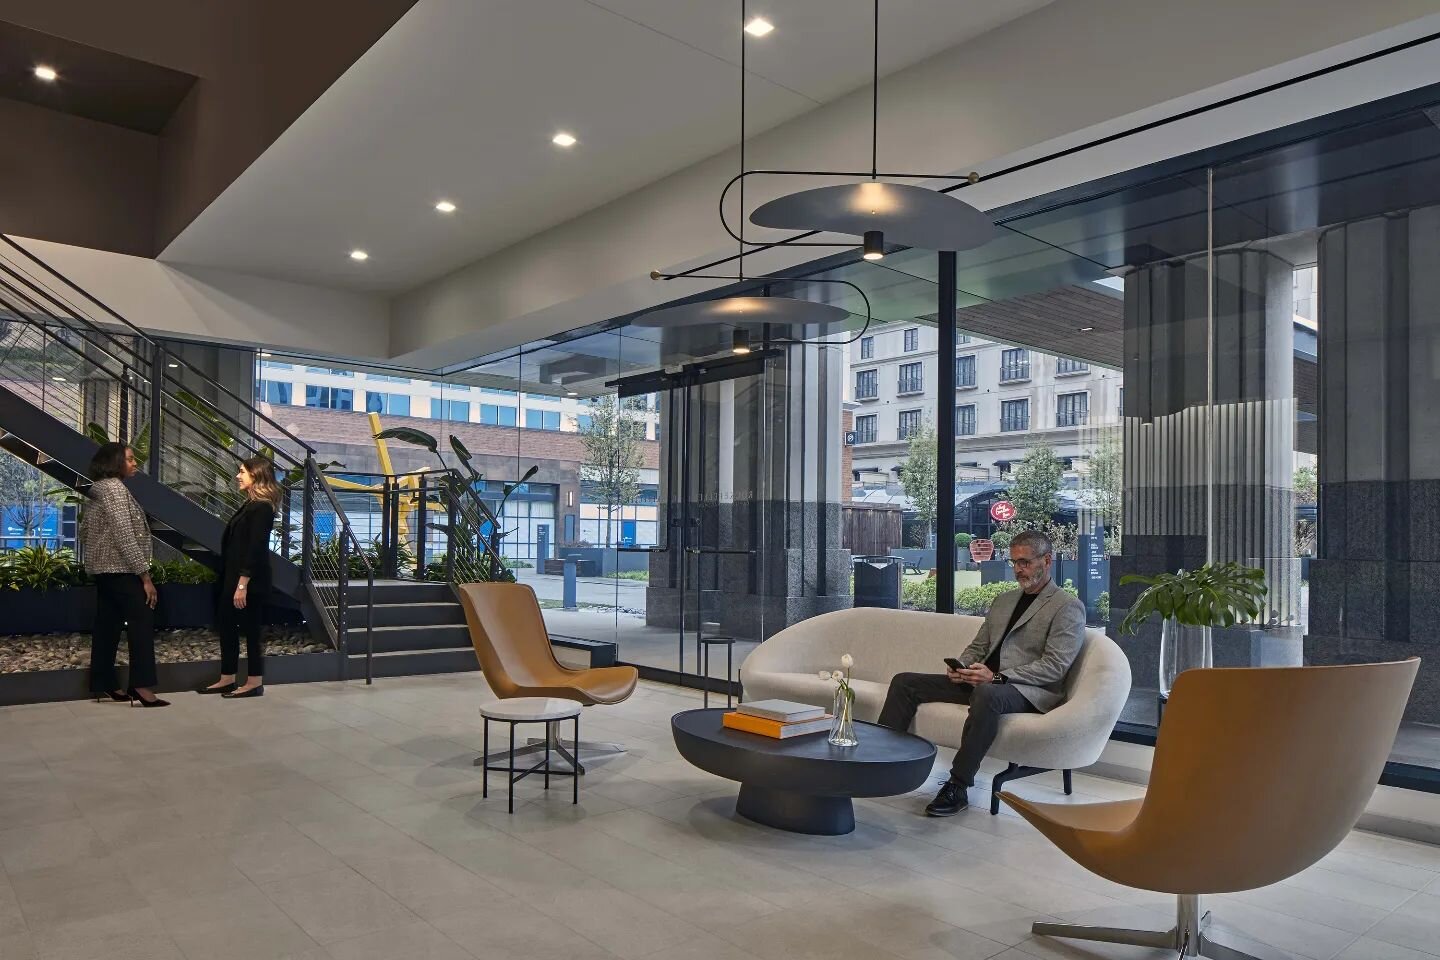 Check out @officesnapshots featuring our Rockefeller Capital Management project! Together, the team transformed a 26,000 square foot space in Atlanta's Buckhead district into a stunning office environment that honors the timeless legacy of the Rockef